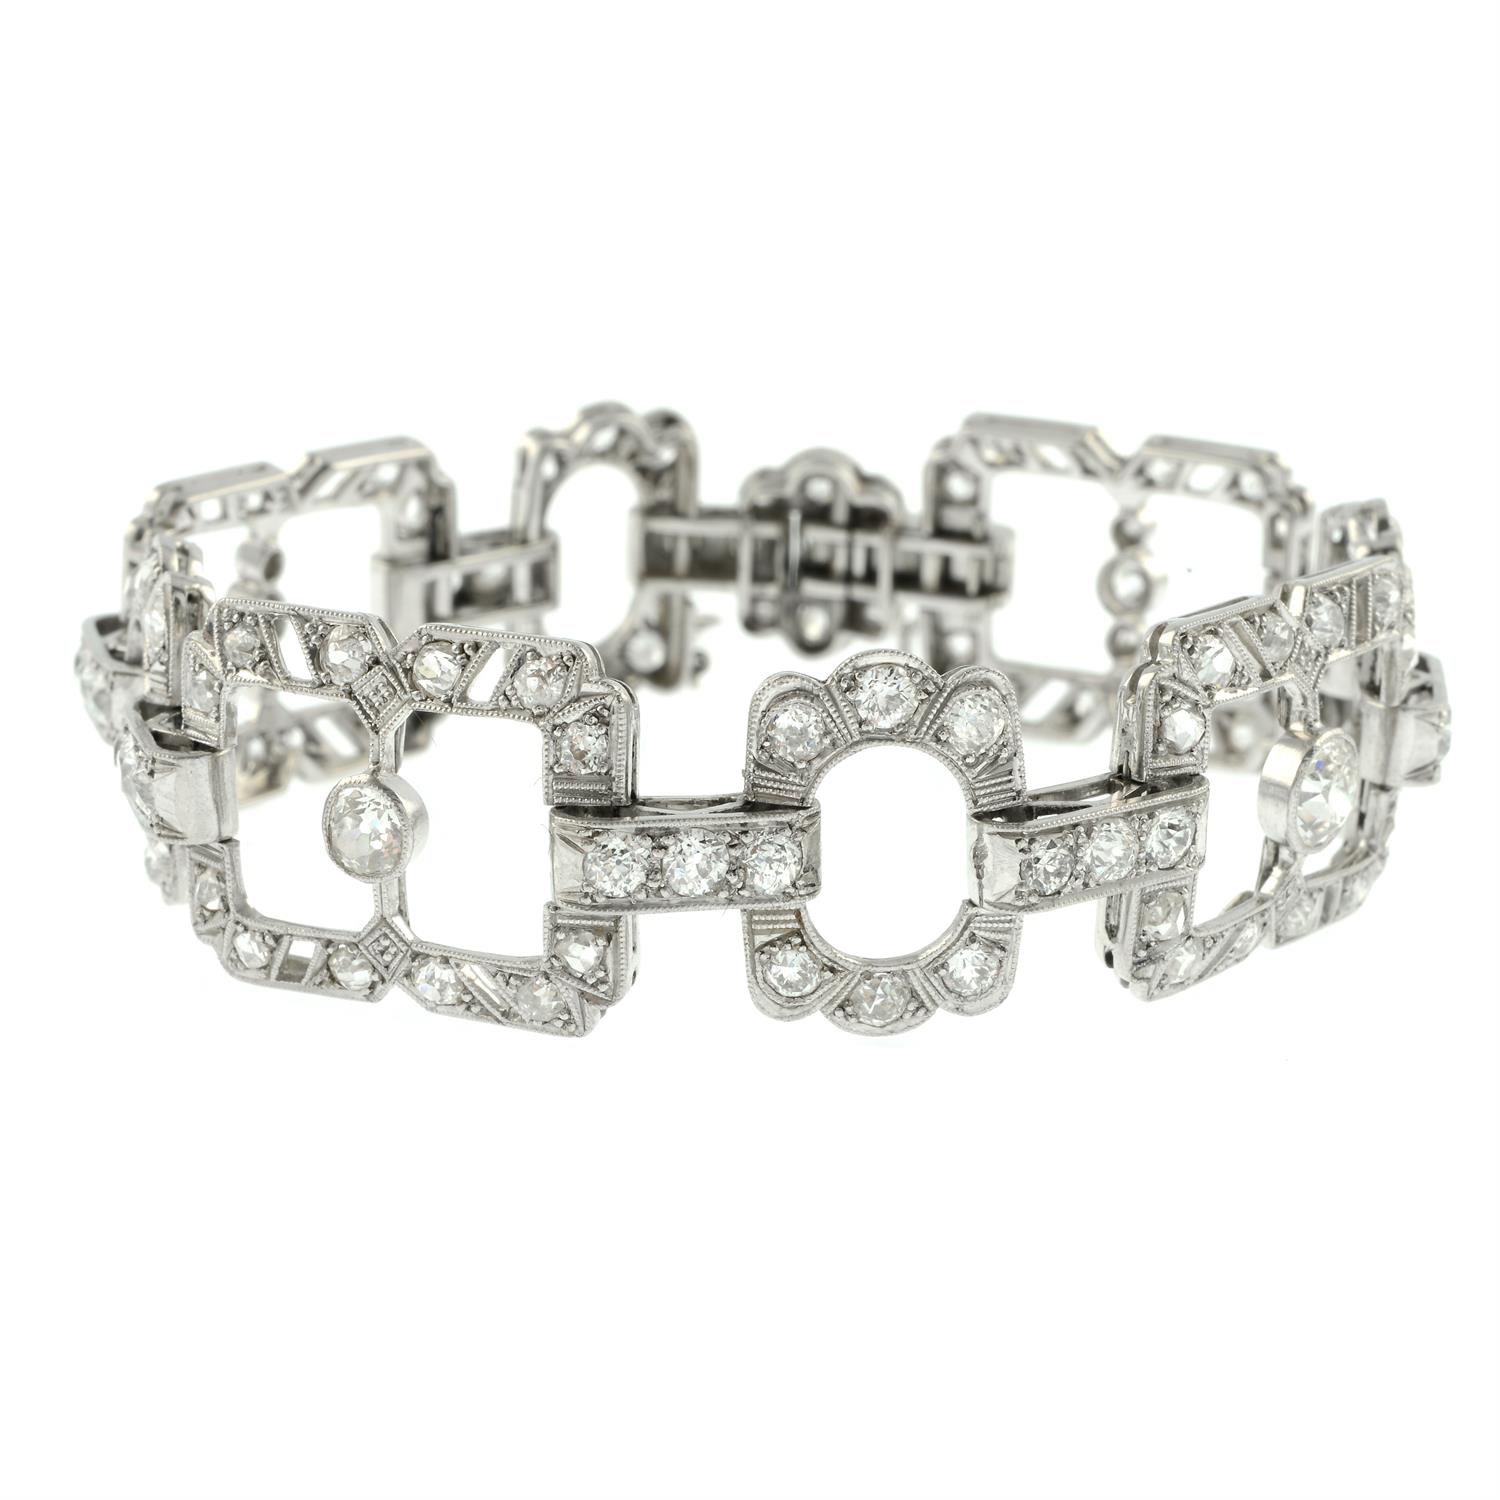 An Art Deco old and rose-cut diamond bracelet. - Image 2 of 4